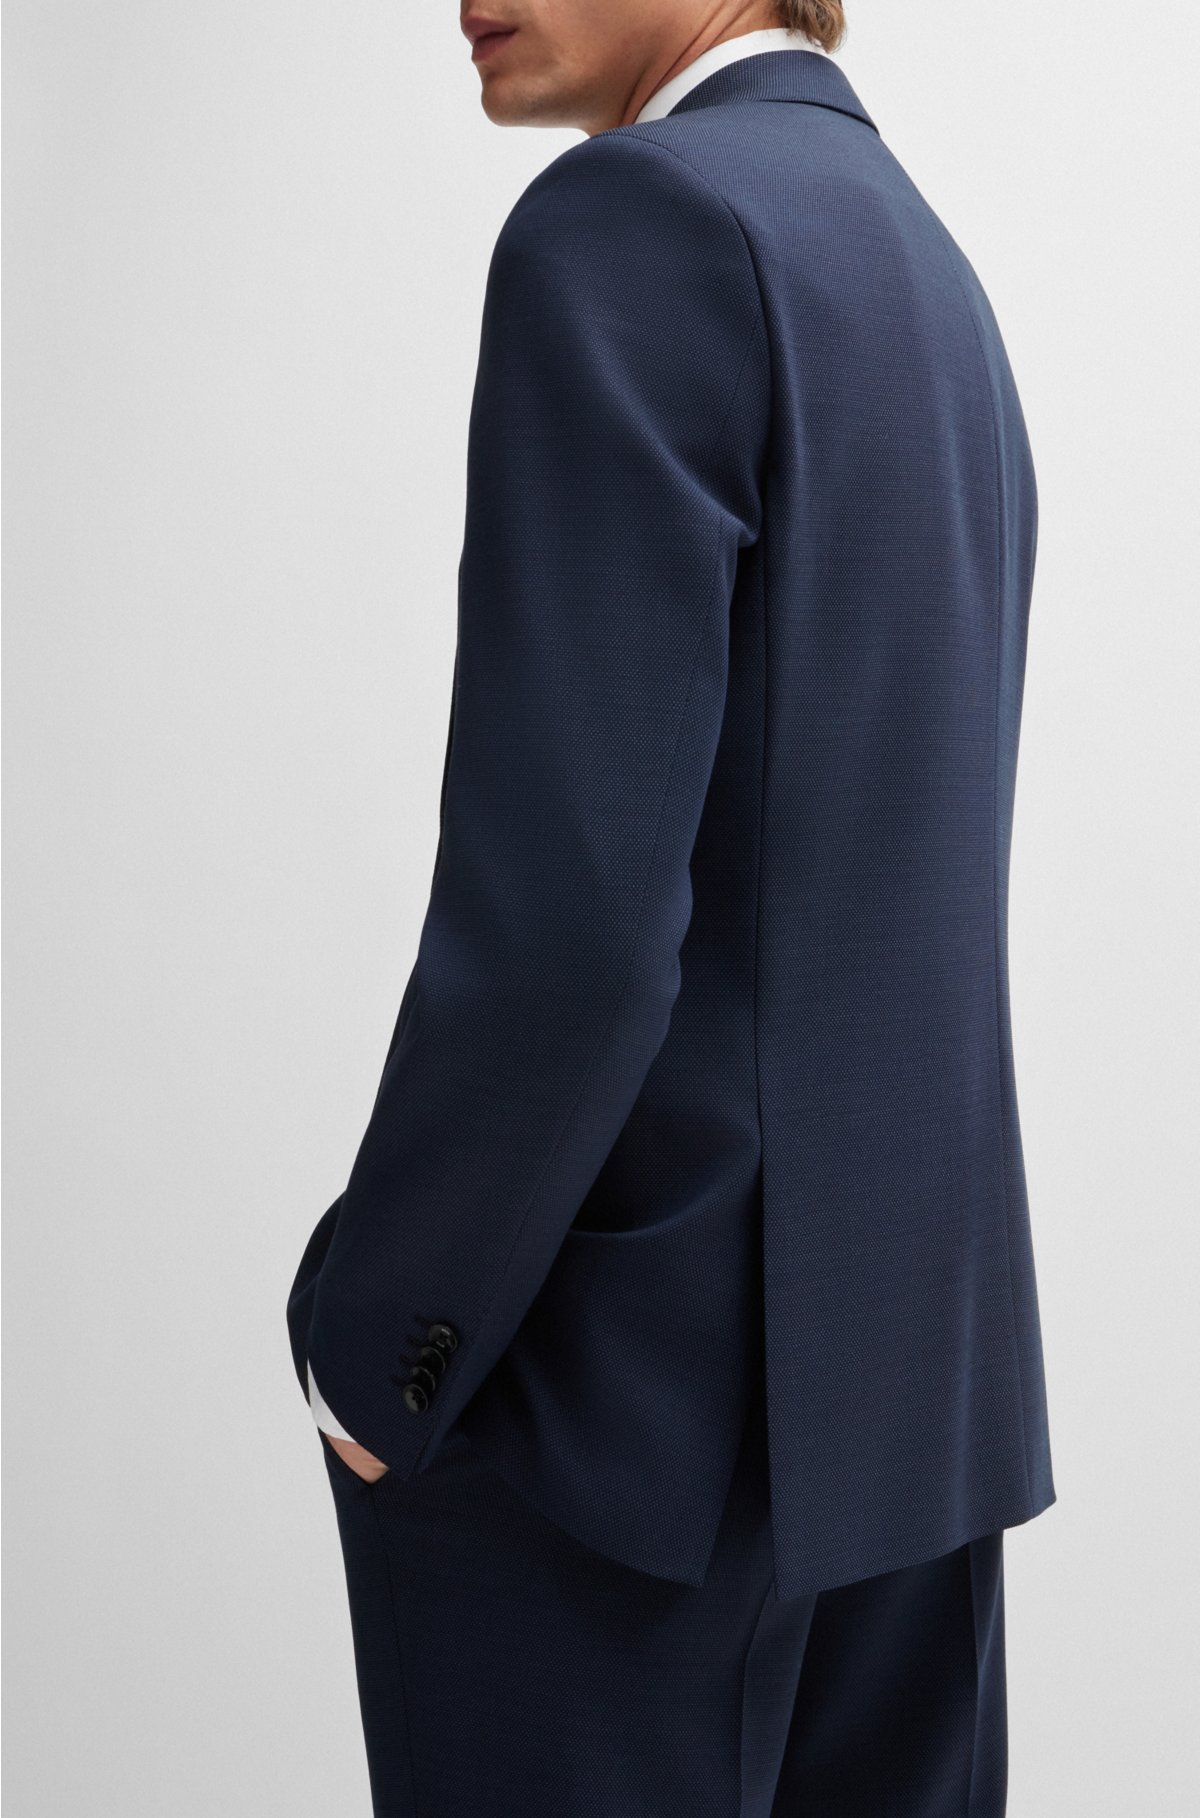 Regular-fit suit in micro-patterned stretch fabric, Dark Blue